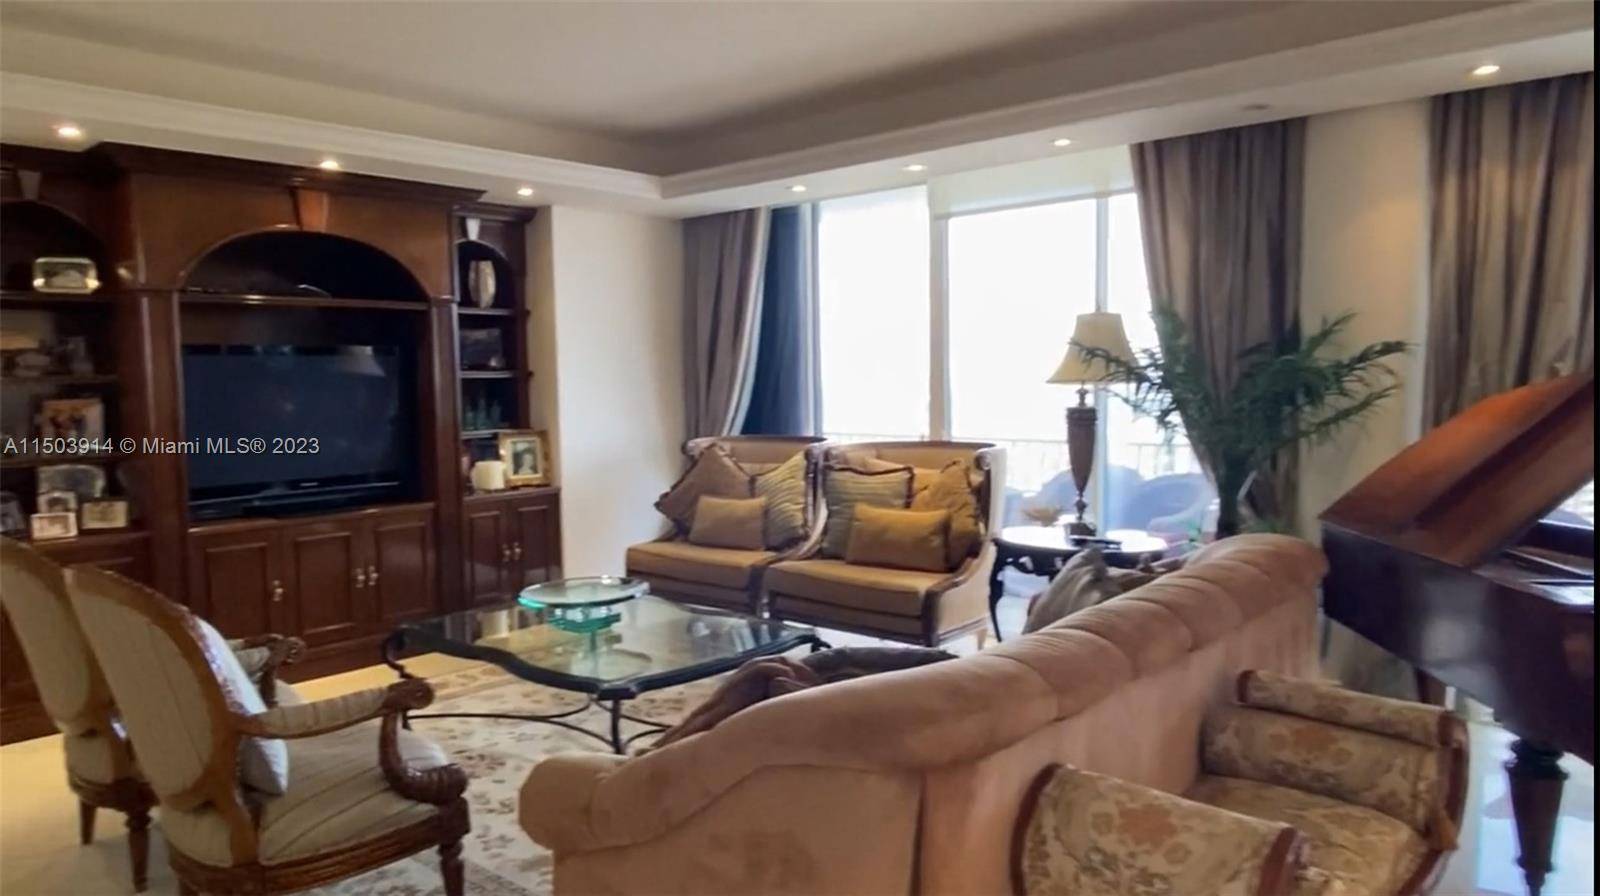 Experience Luxury in this Penthouse Duplex Unit, graced by a stunning staircase lofty ceilings.